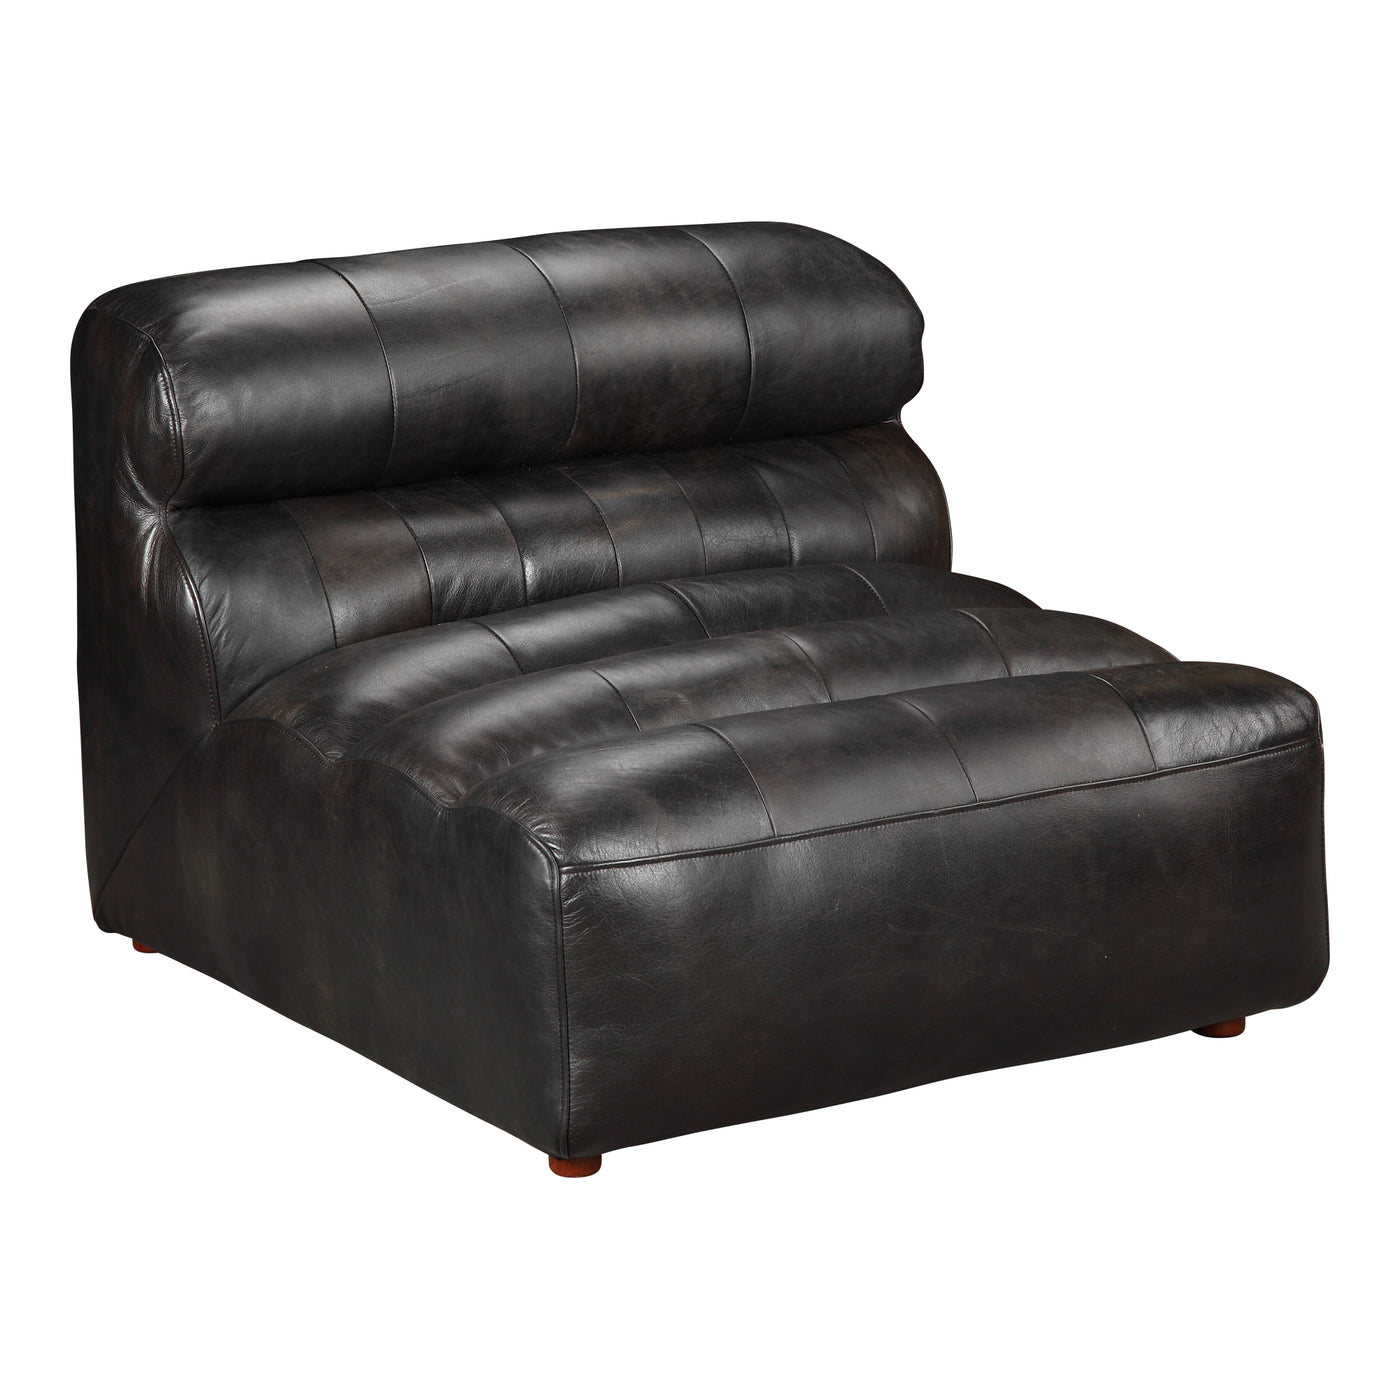 With a low profile and thick cushions, the Ramsay Leather Slipper Chair is the perfect addition to your living room. A sof...